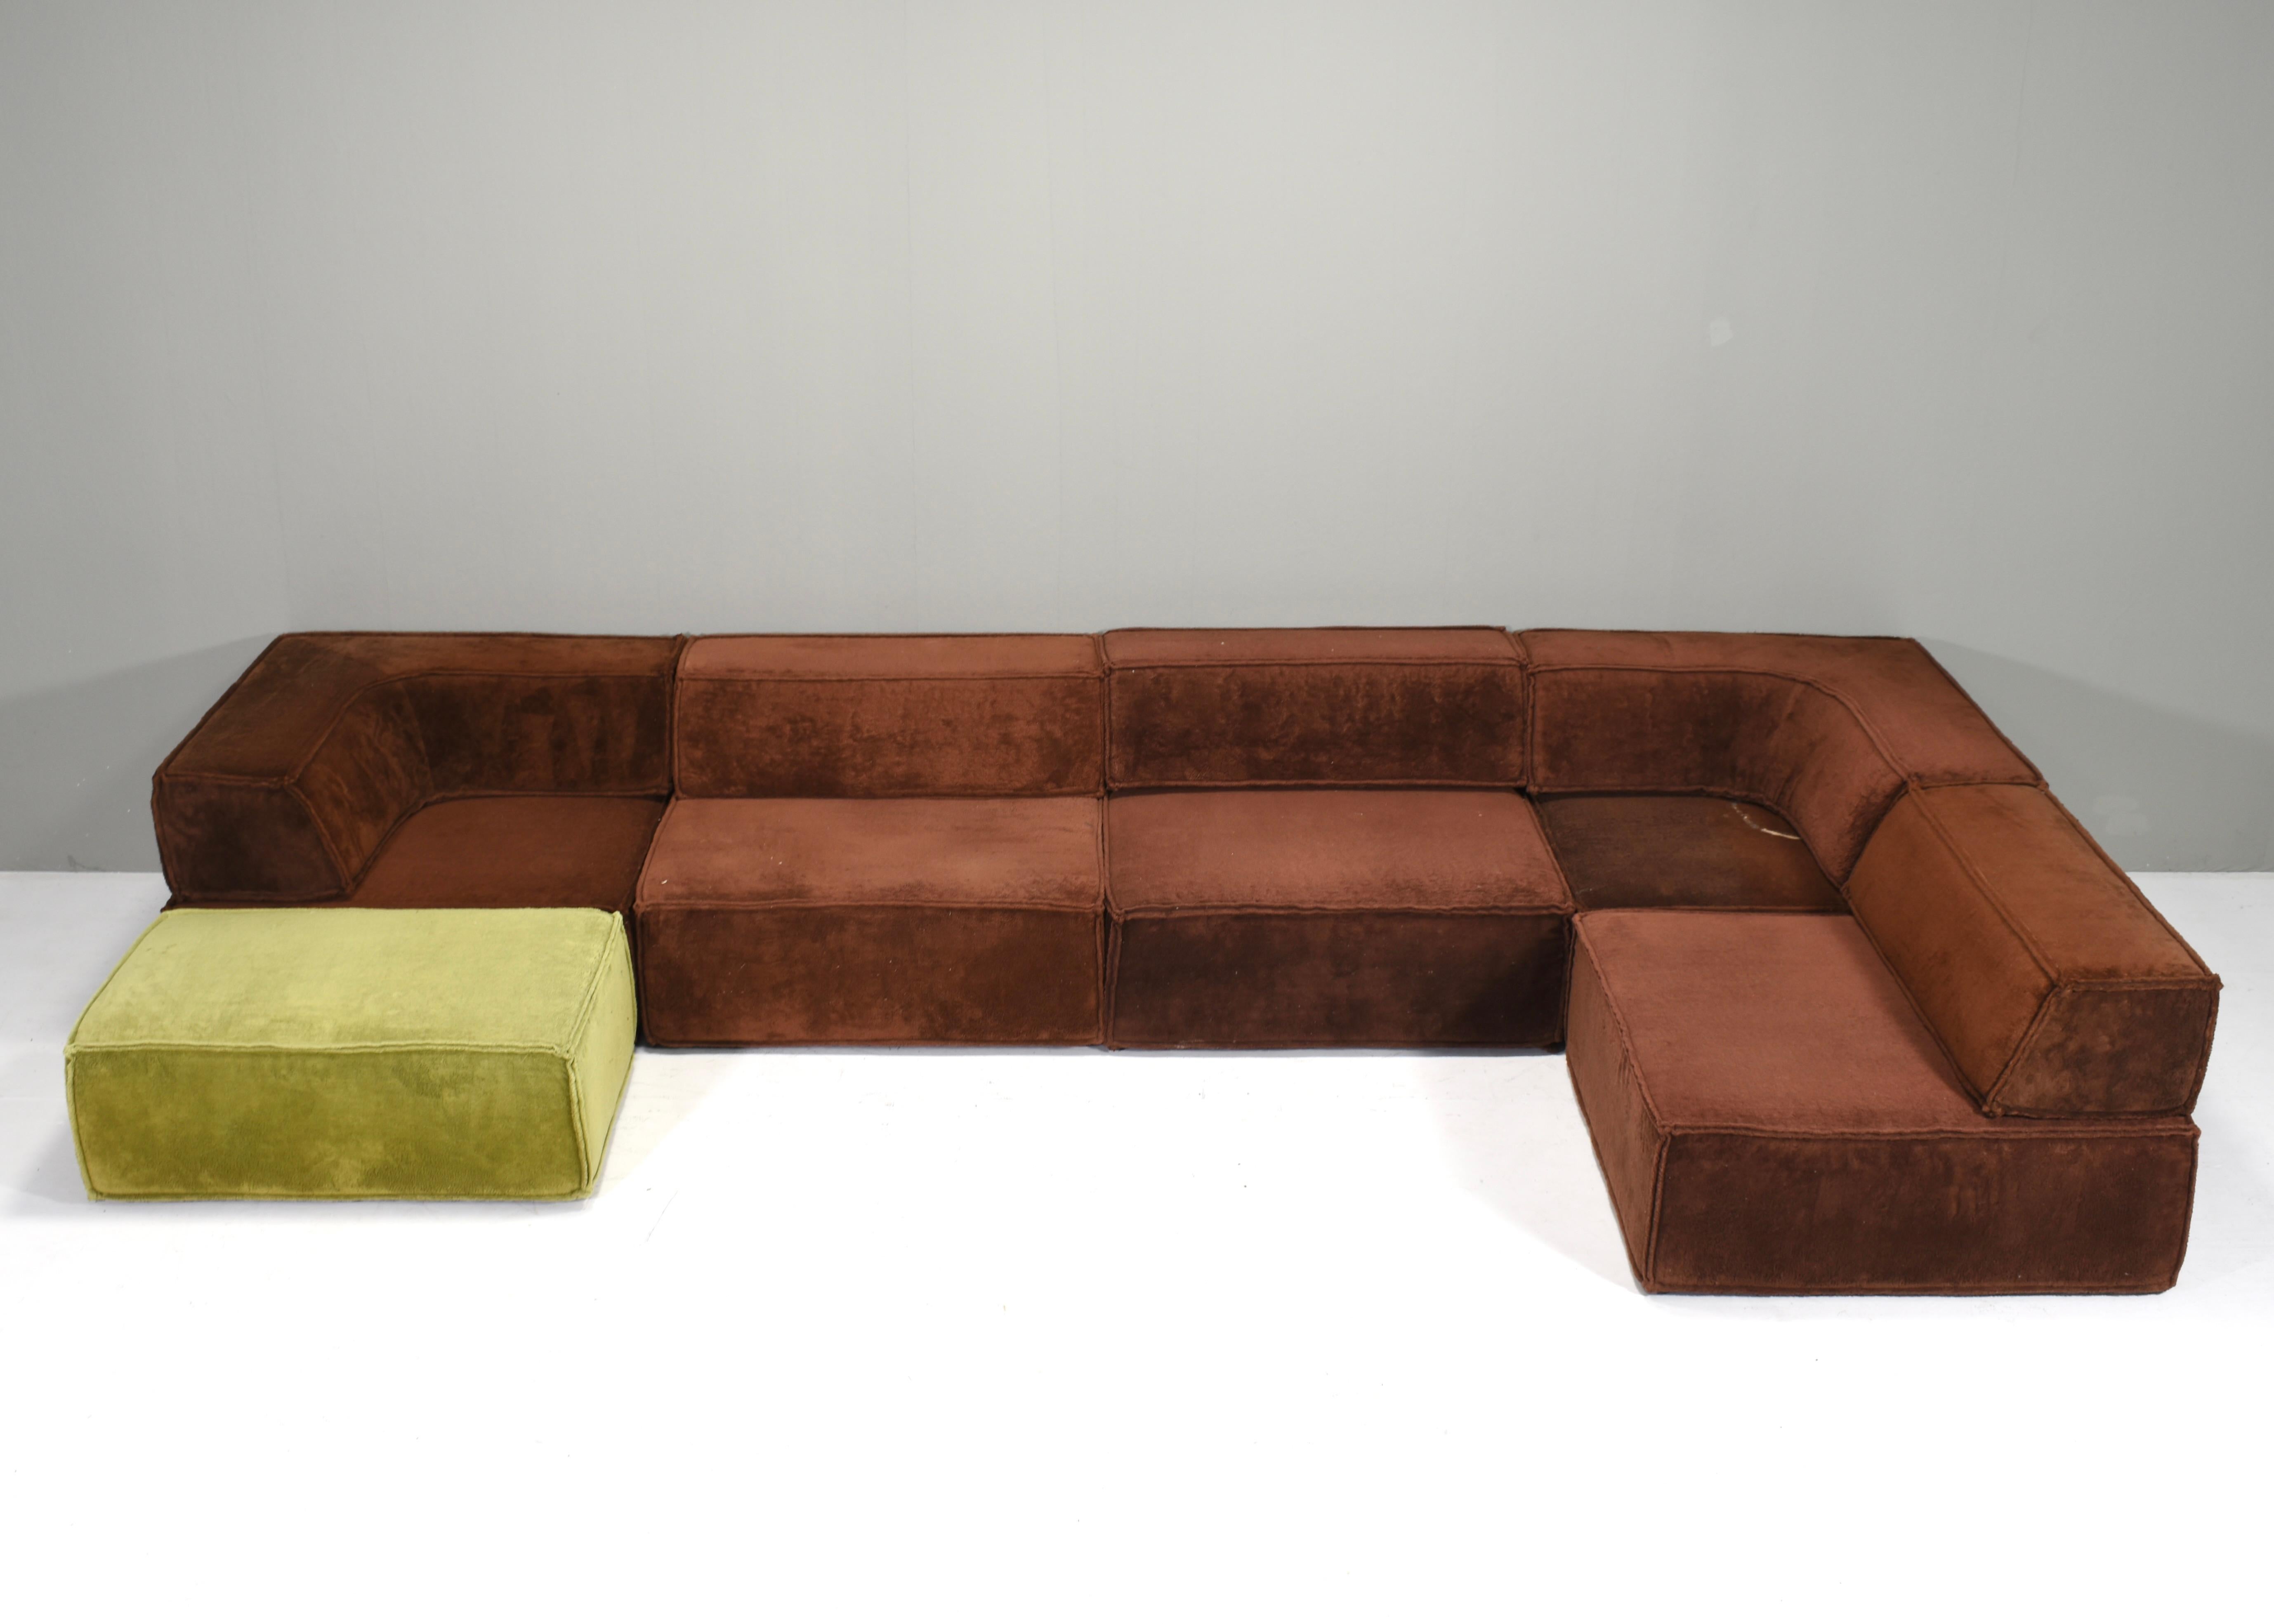 Late 20th Century COR Trio Sectional Sofa for REUPHOLSTERING, Germany / Switzerland, 1972 For Sale